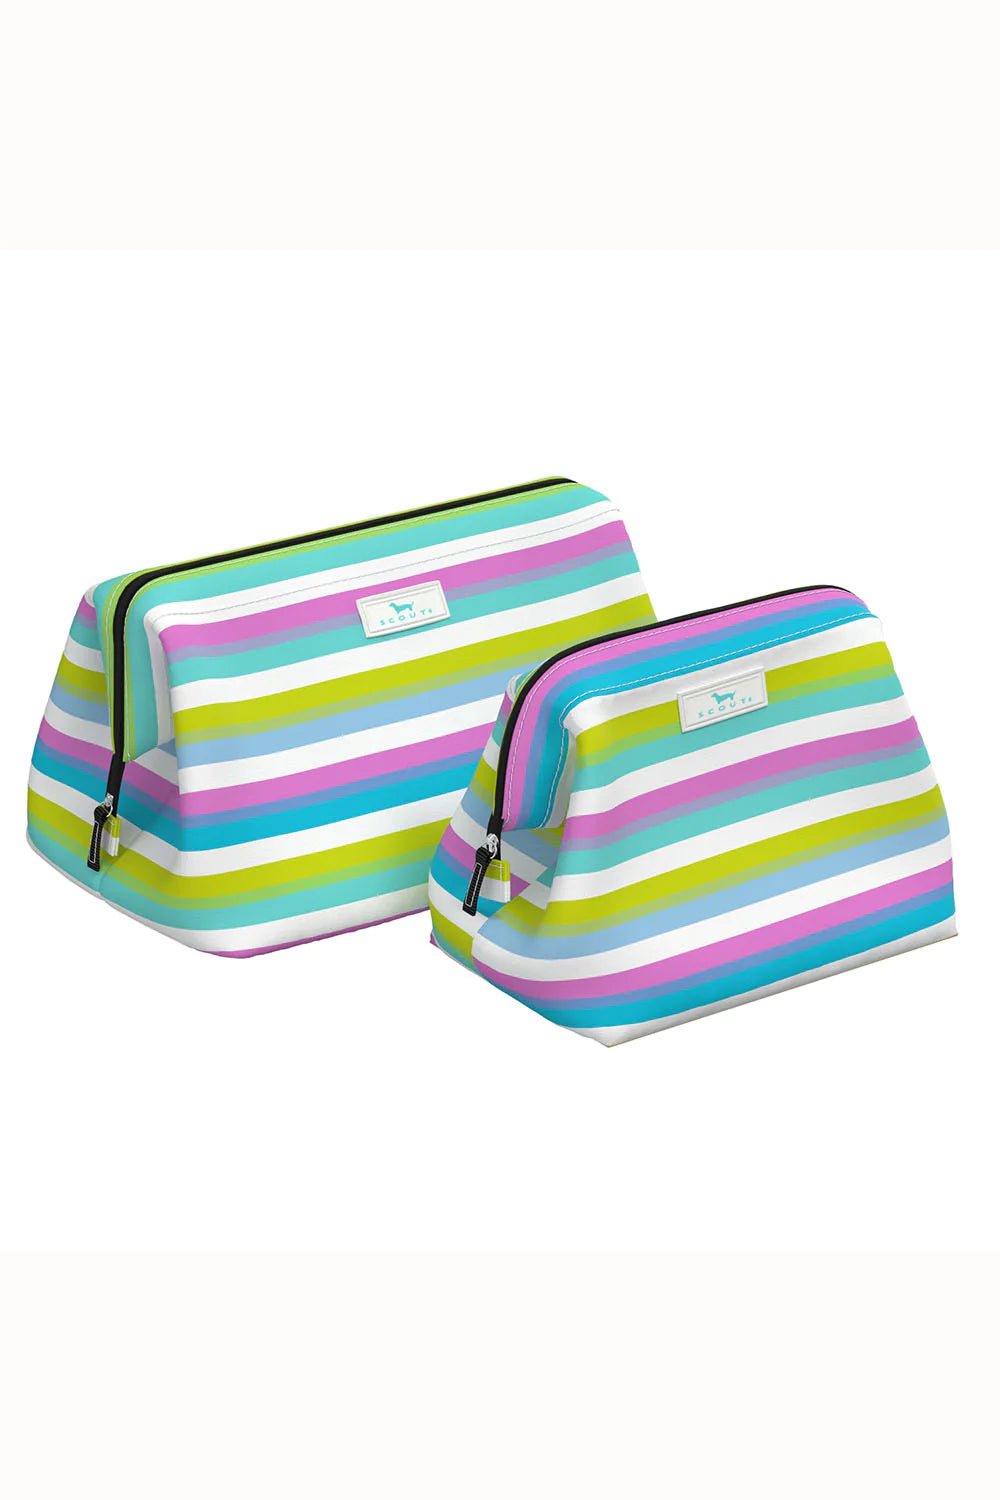 Little Big Mouth Toiletry Bag | Sweet Tarts